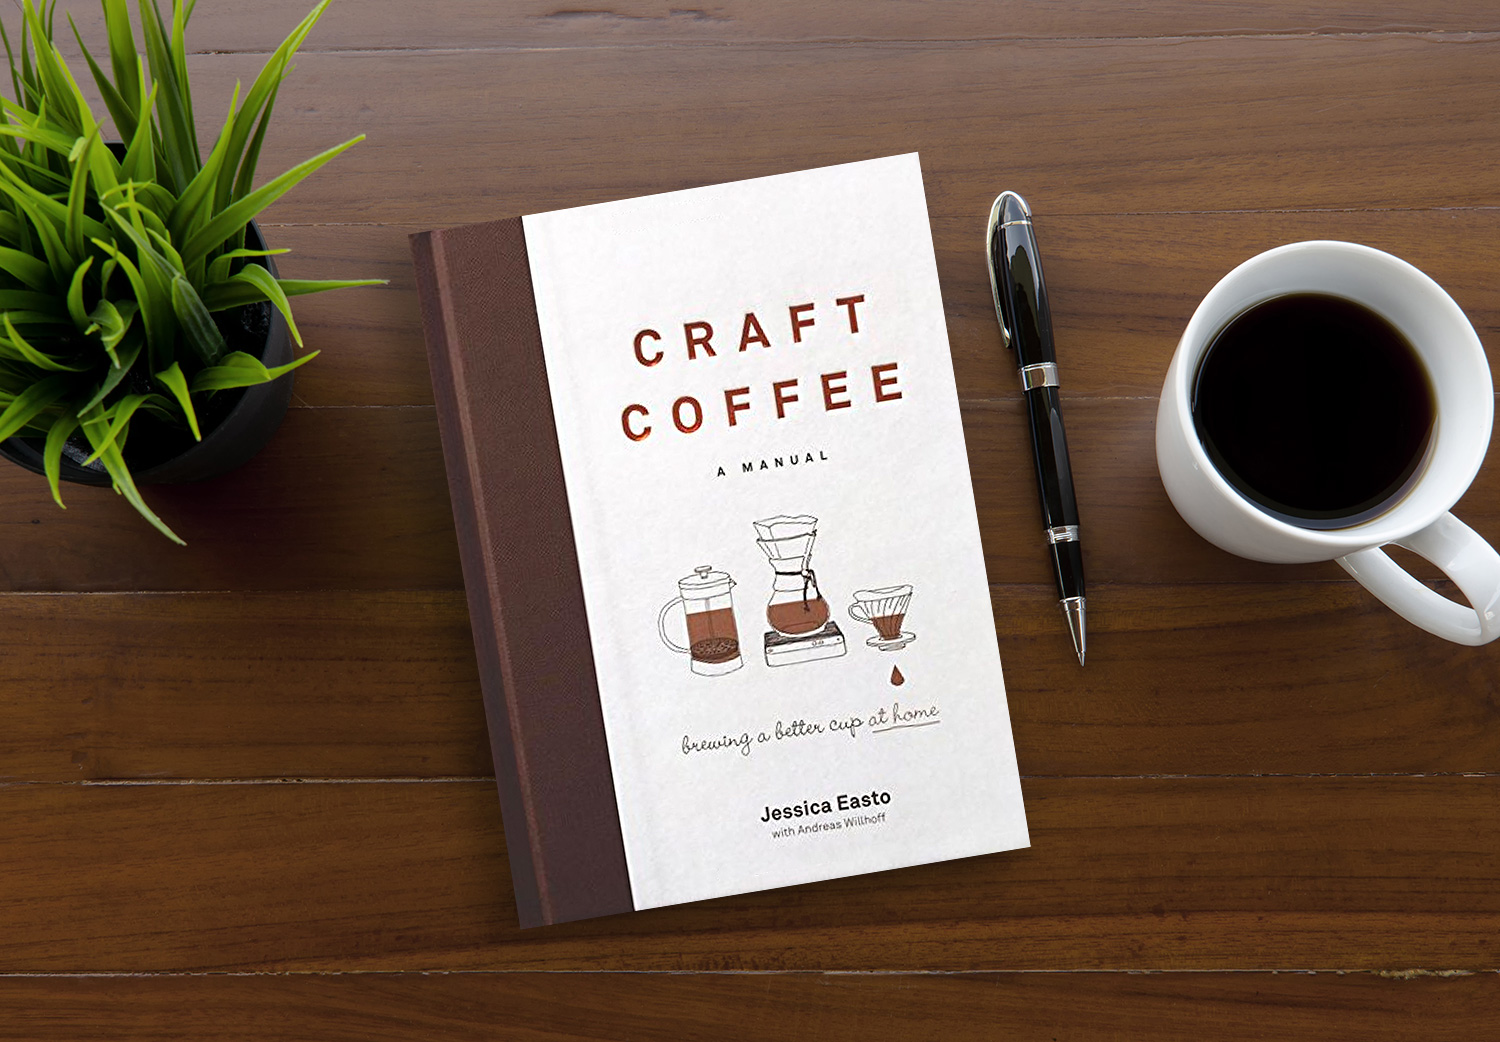 The New Art of Coffee - a look at the book combining coffee and cocktail  mixology